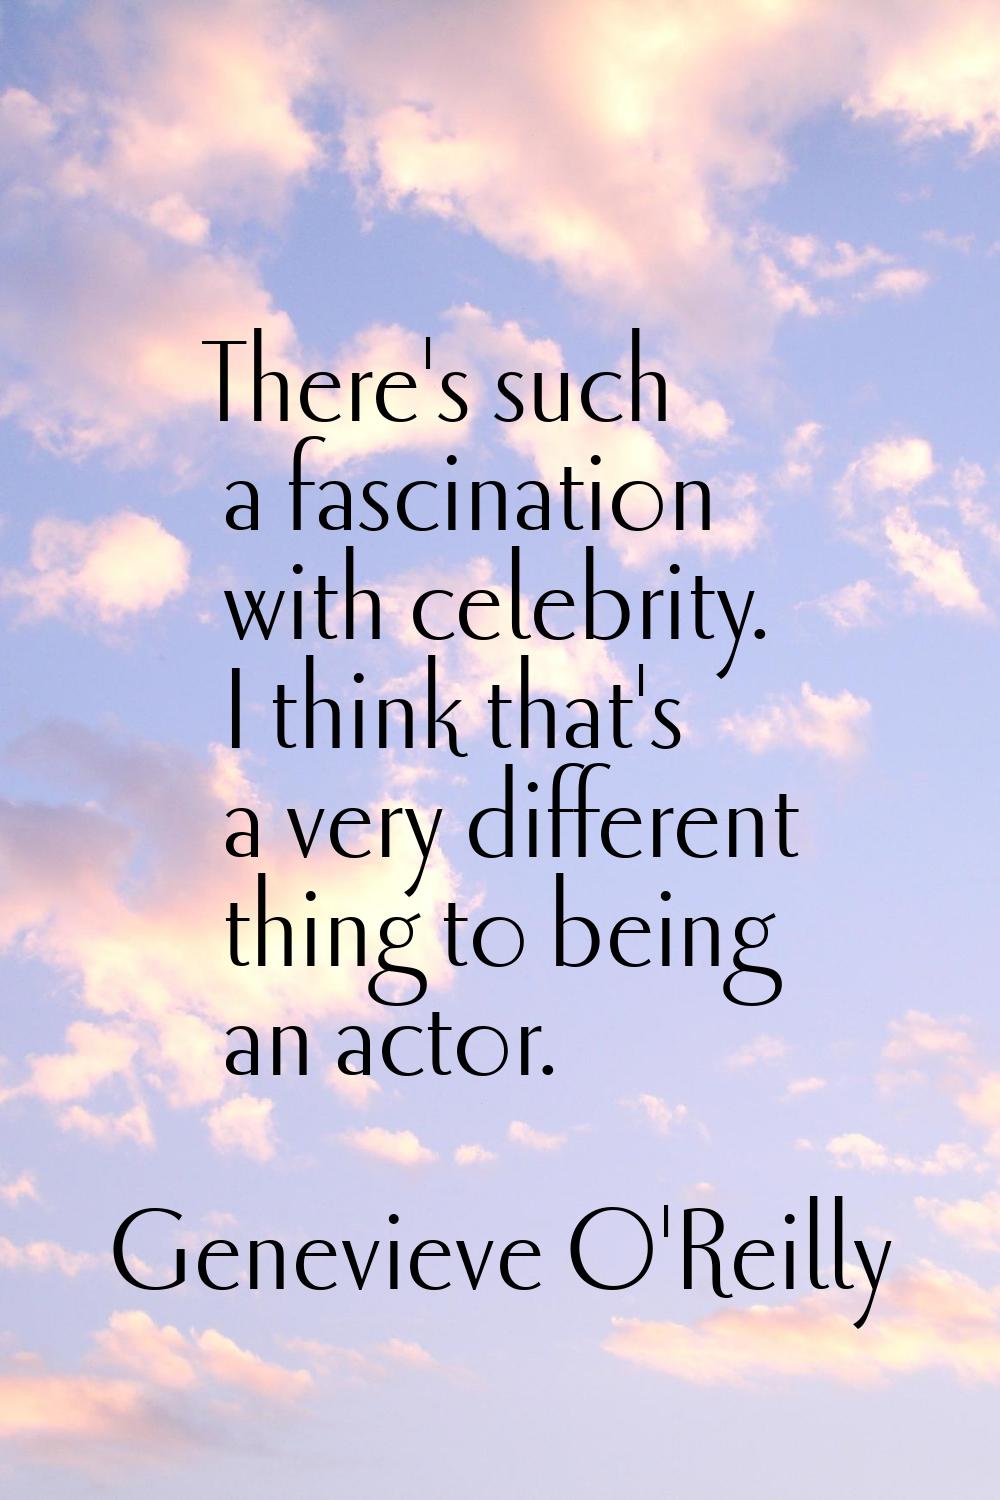 There's such a fascination with celebrity. I think that's a very different thing to being an actor.